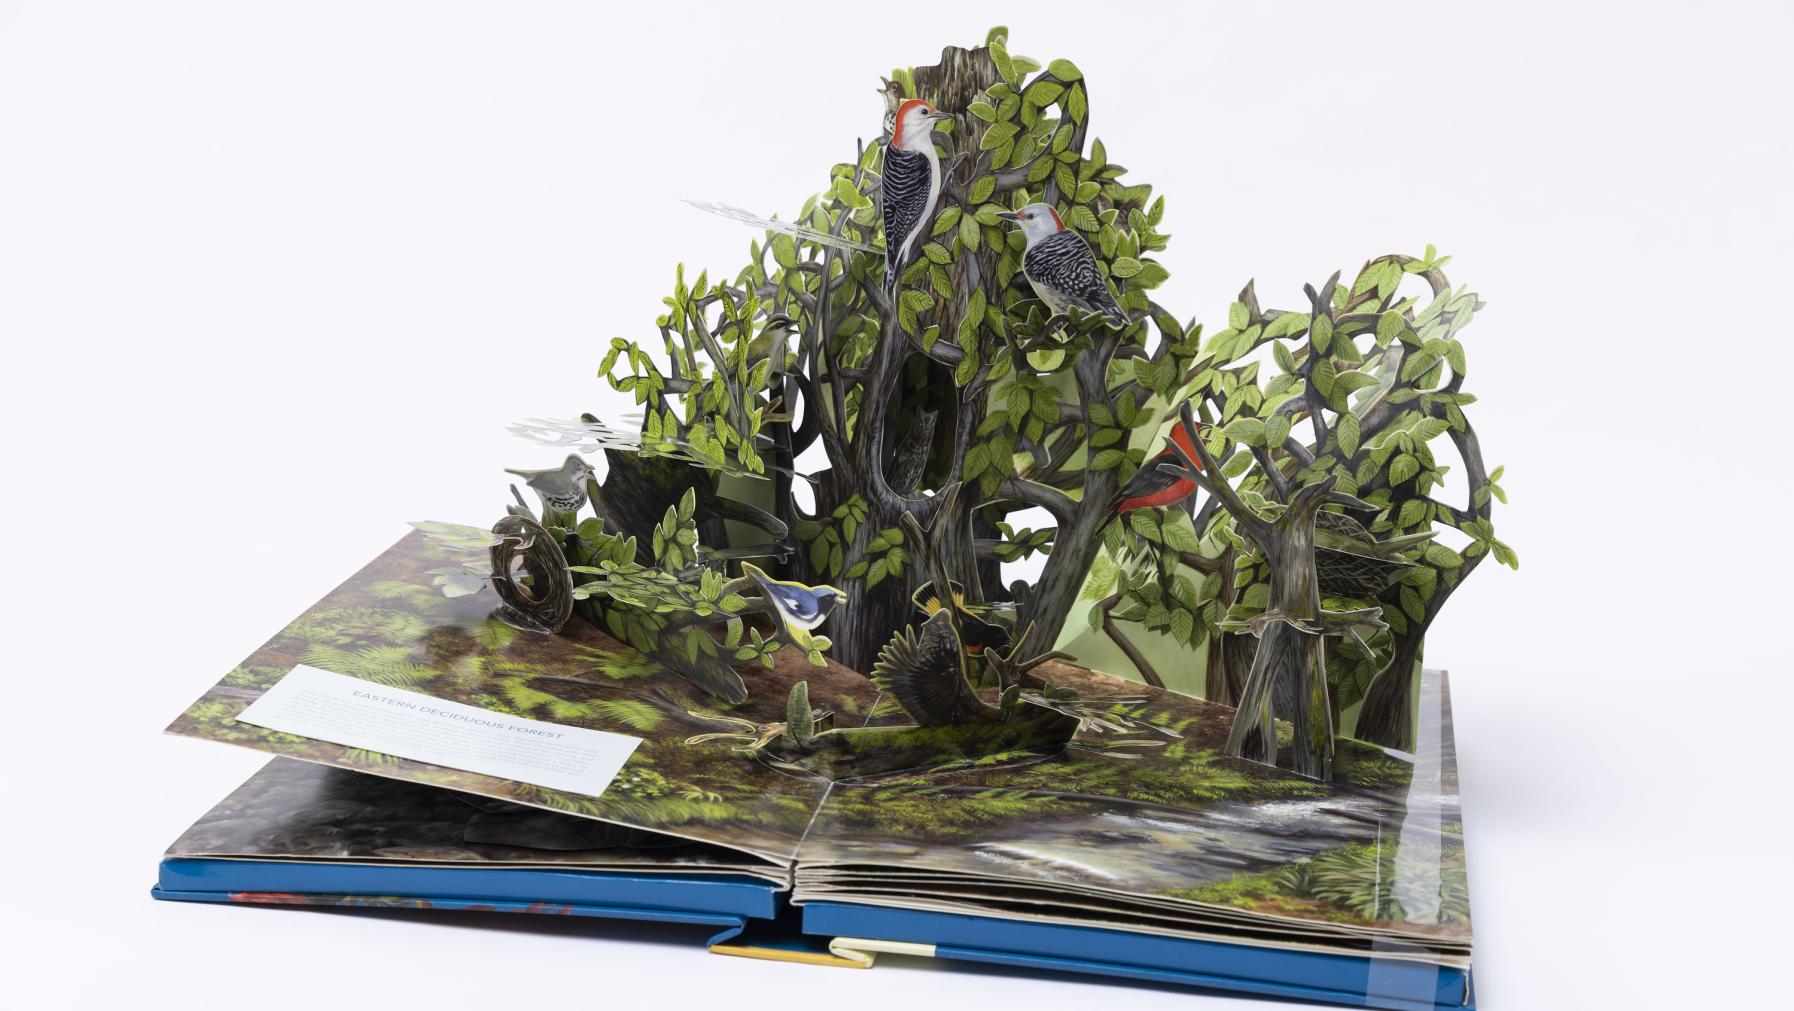 A pop-up book showing dense foliage inhabited by various birds from Birdscape.